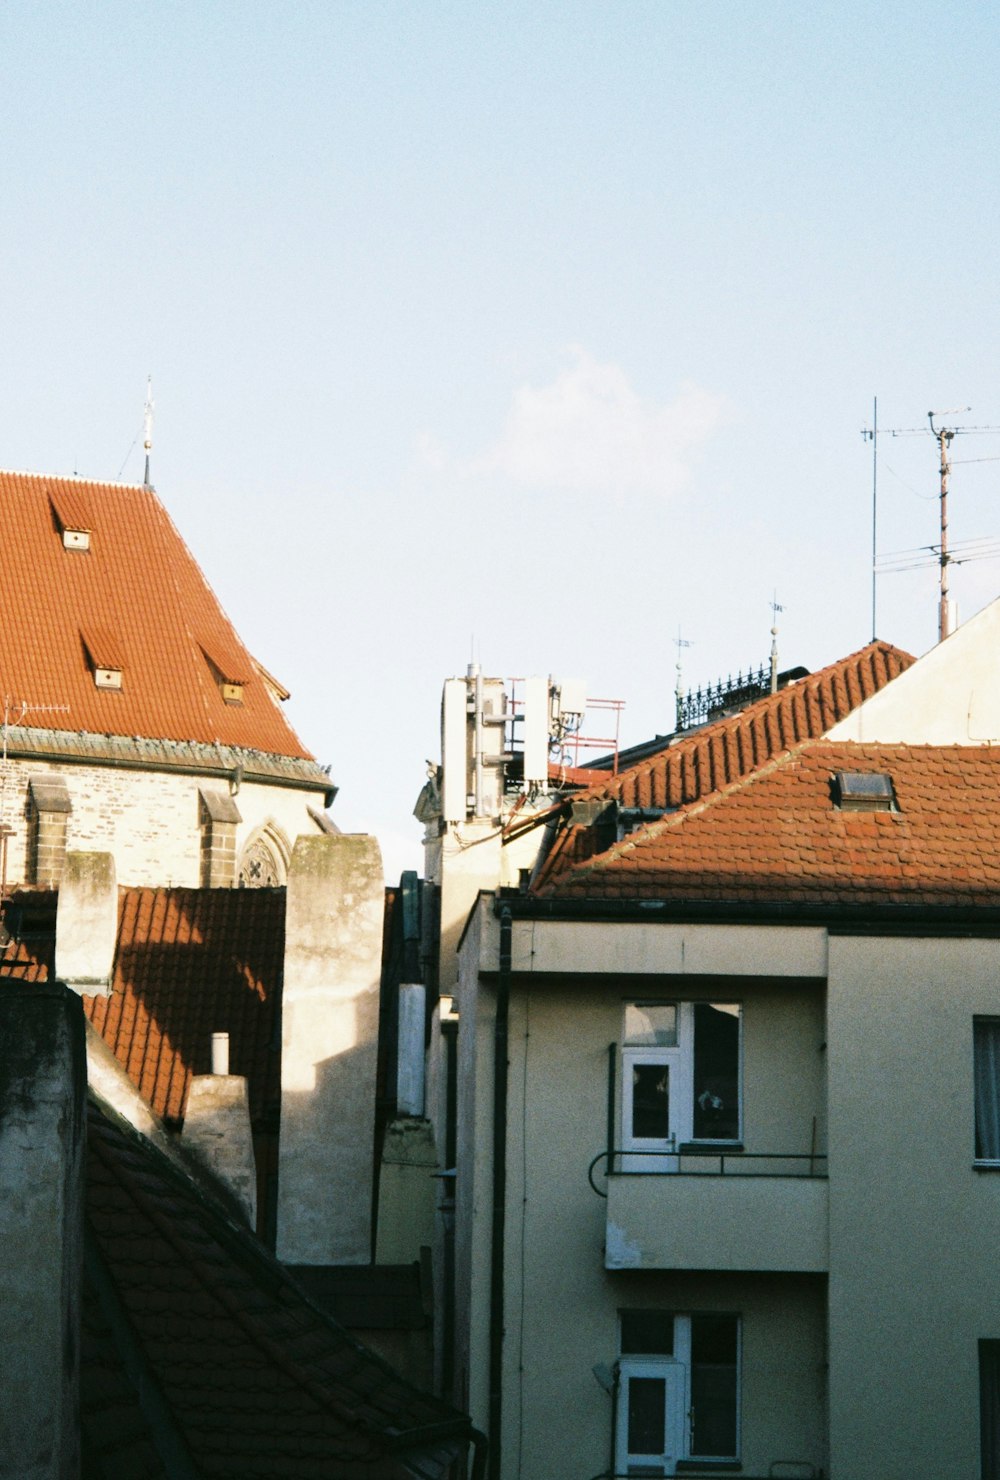 a view of some buildings from a rooftop